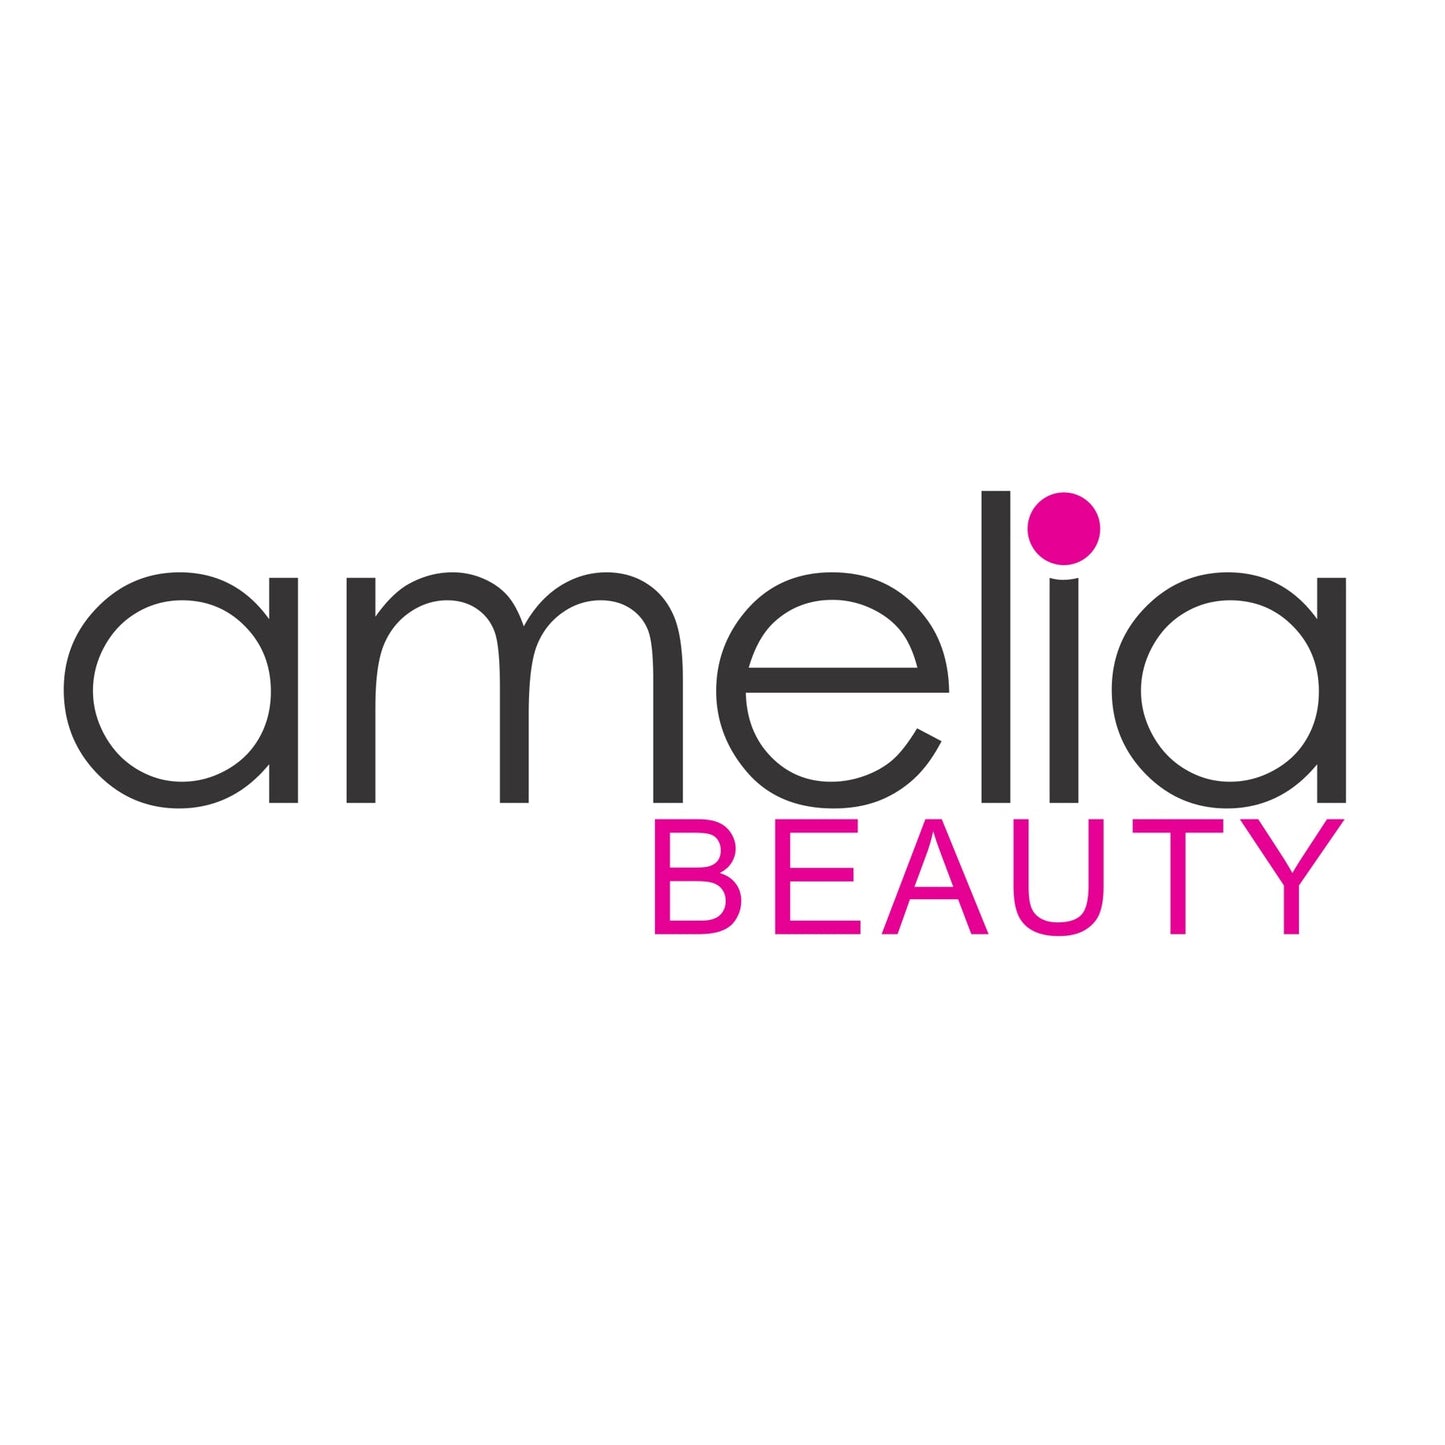 Amelia Beauty Cellulose Acetate 8in Handle Comb, Handmade, Smooth Edges, Eco-Friendly Plant Based Material, Course Tooth - Black Color